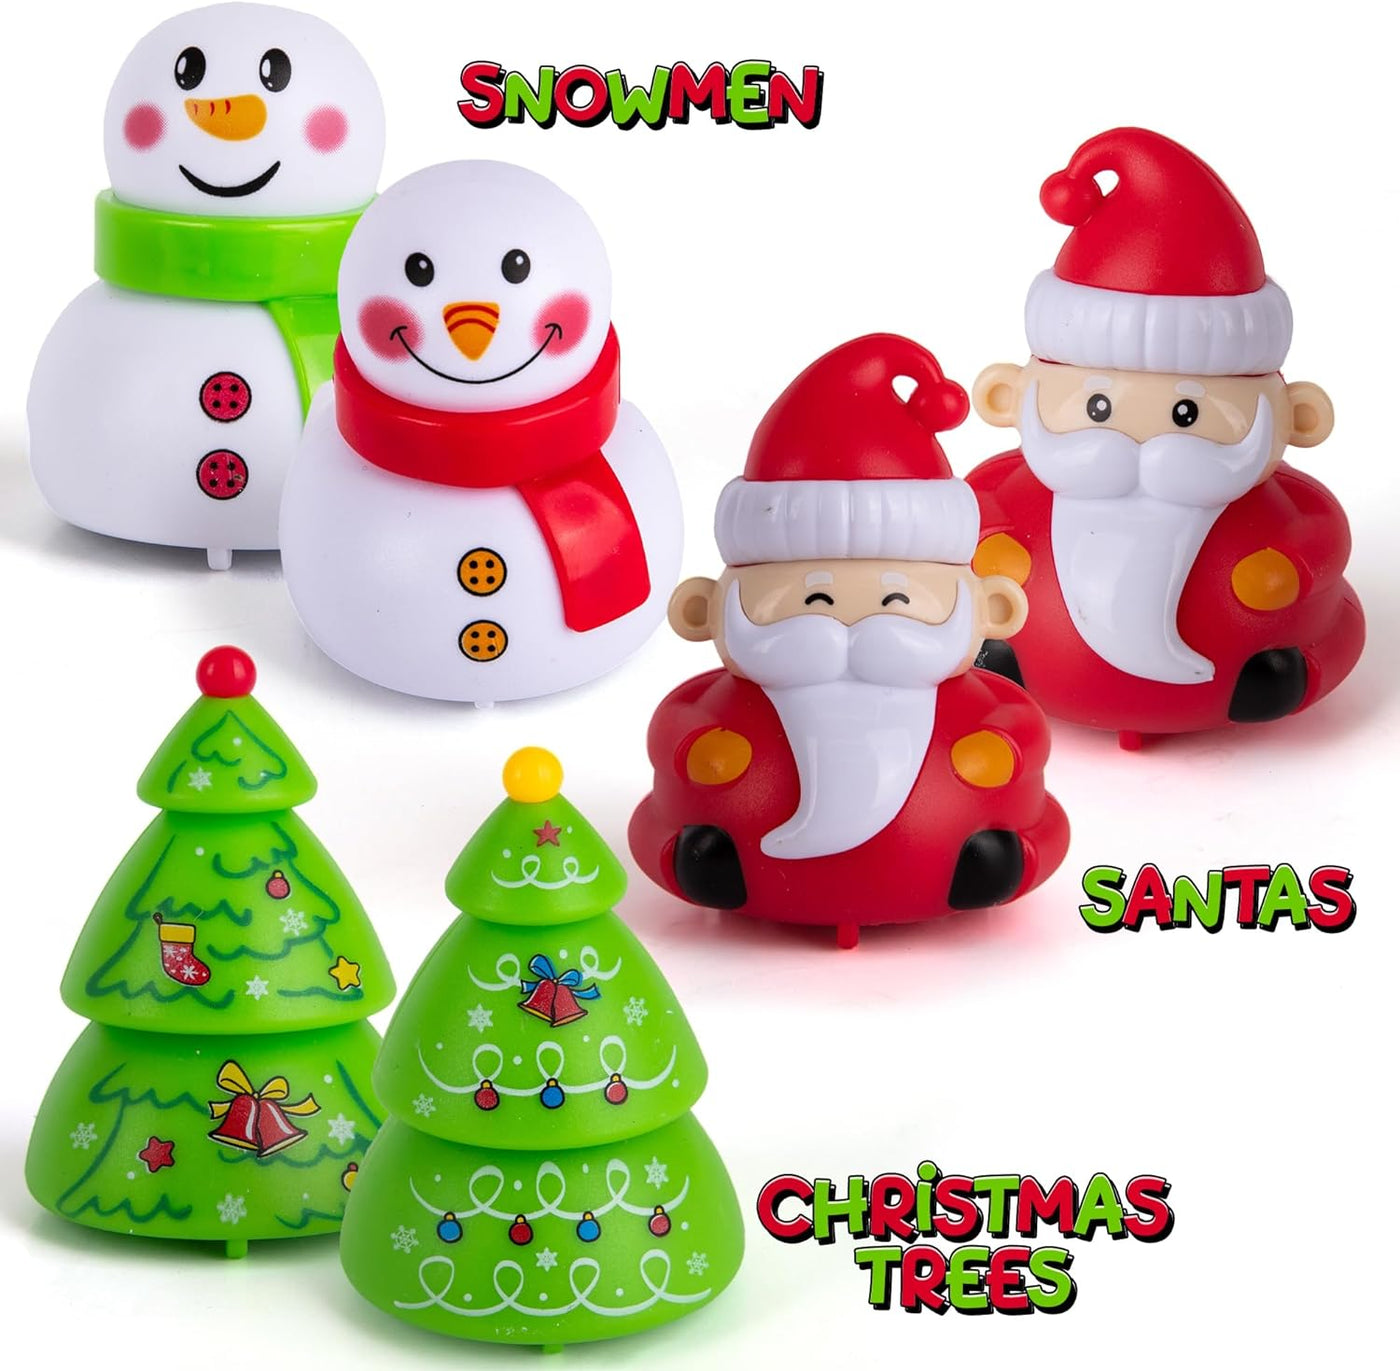 ArtCreativity Christmas Pull Back Cars - Set of 6 Pull Back Cars - Pull Back Toys for Kids in Xmas Designs - Christmas Themed Toys for Toddlers, Holiday Stocking Stuffers, Goodie Bag Fillers